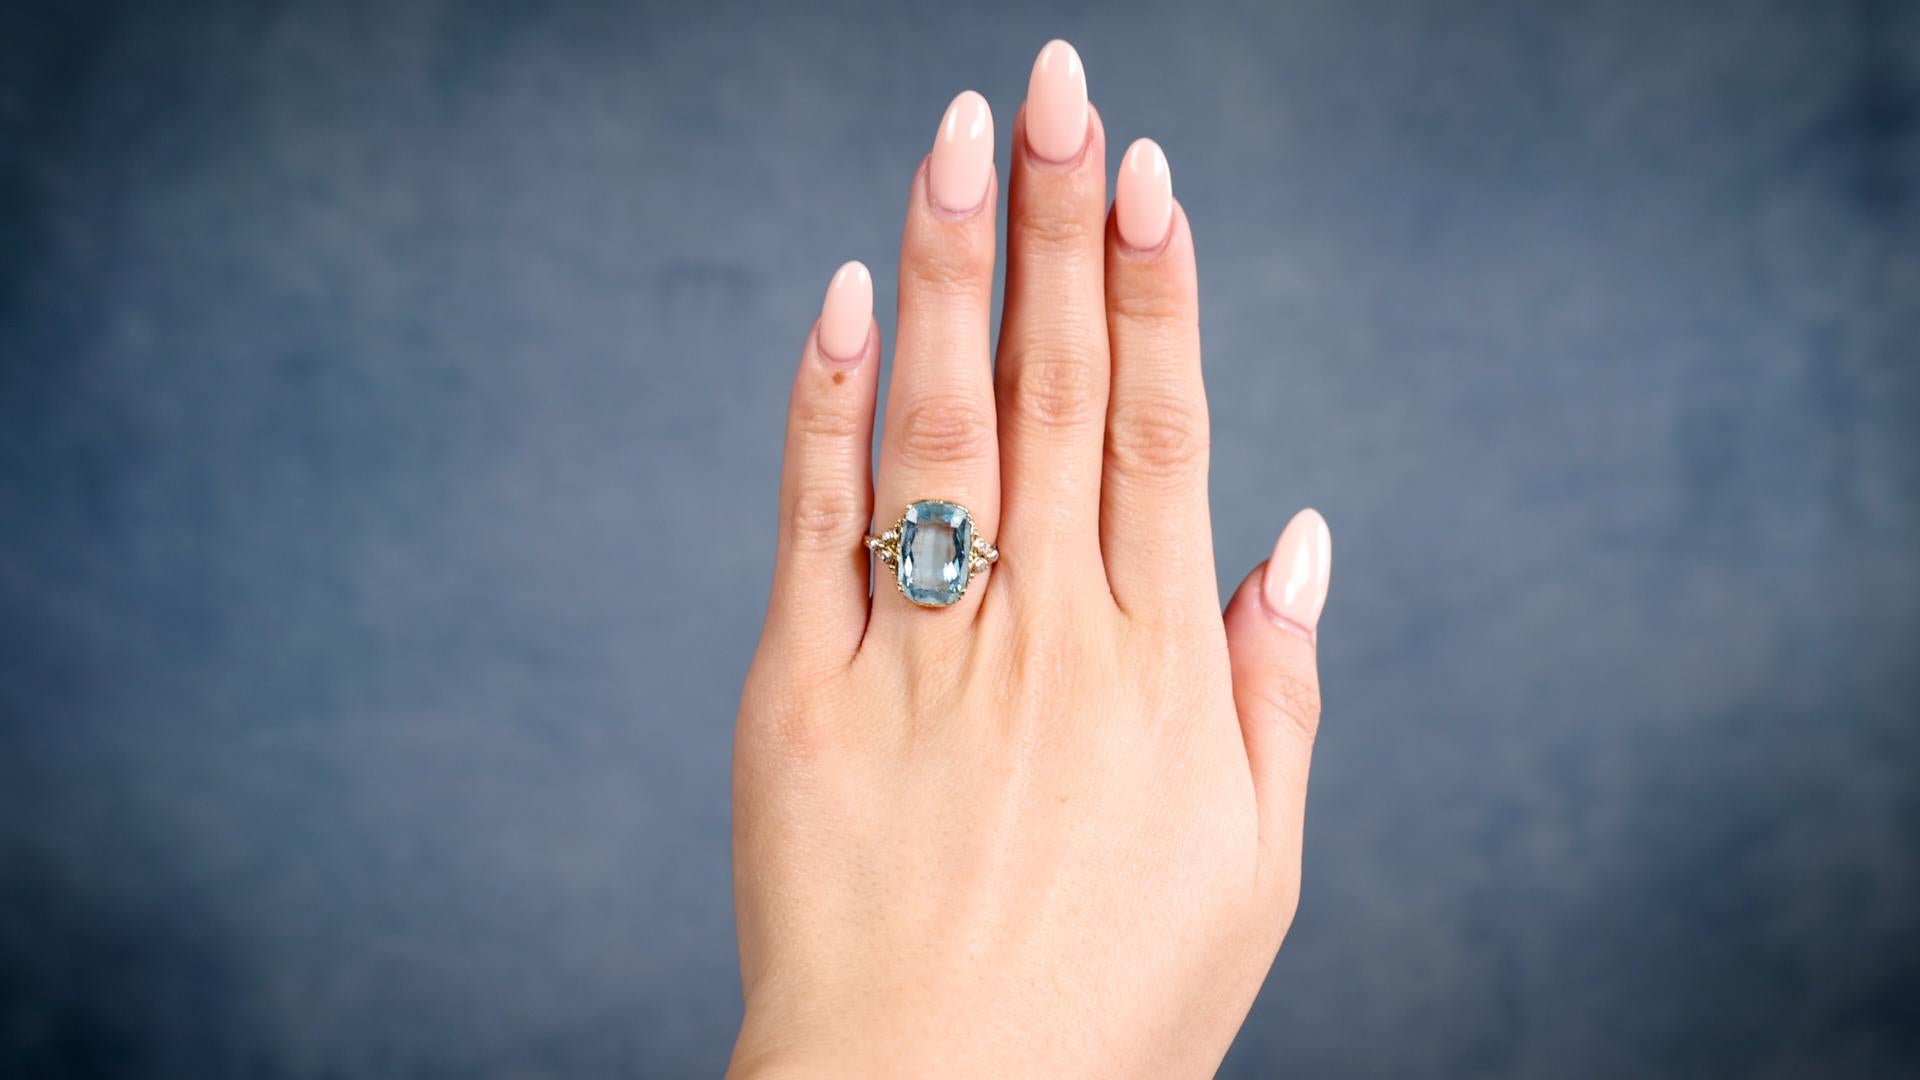 One Edwardian Aquamarine Diamond 14k Yellow Gold Silver Ring. Featuring one cushion cut aquamarine weighing approximately 4.75 carats. Accented by six senaille cut diamonds. Crafted in 14 karat yellow gold with diamonds set in silver. Circa 1900.